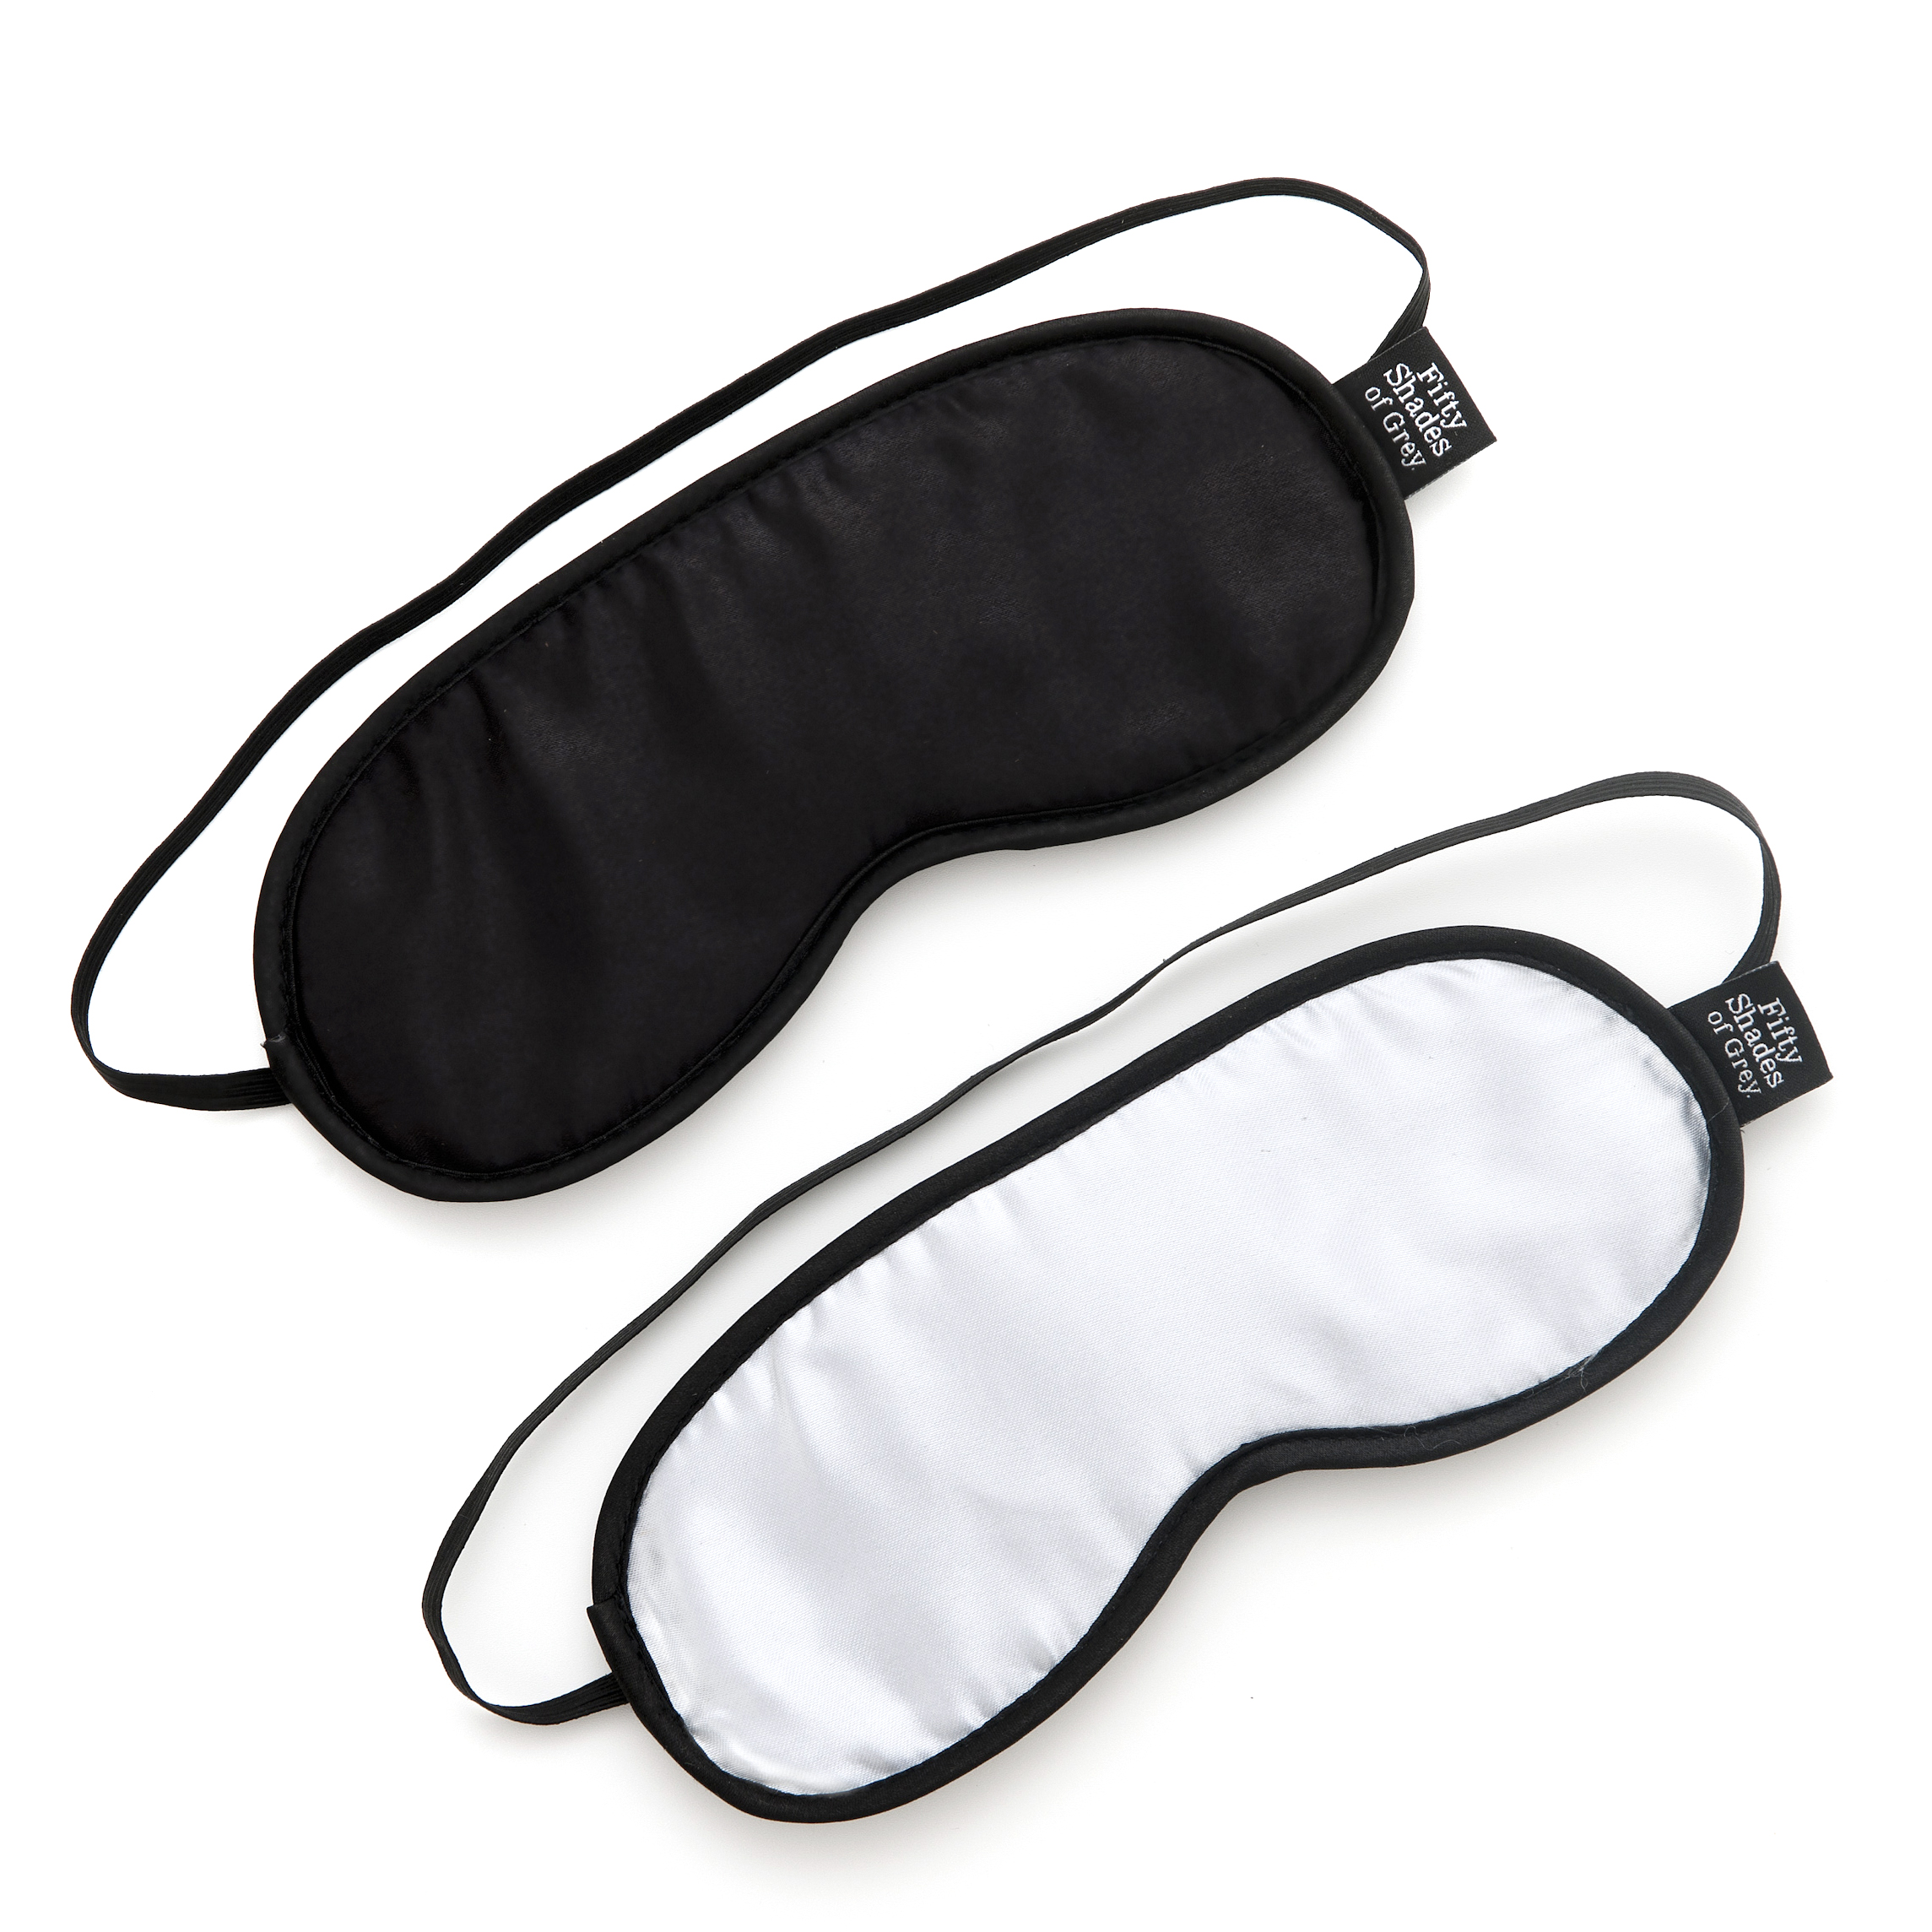 FIFTY SHADES SOFT TWIN BLINDFOLD SET  